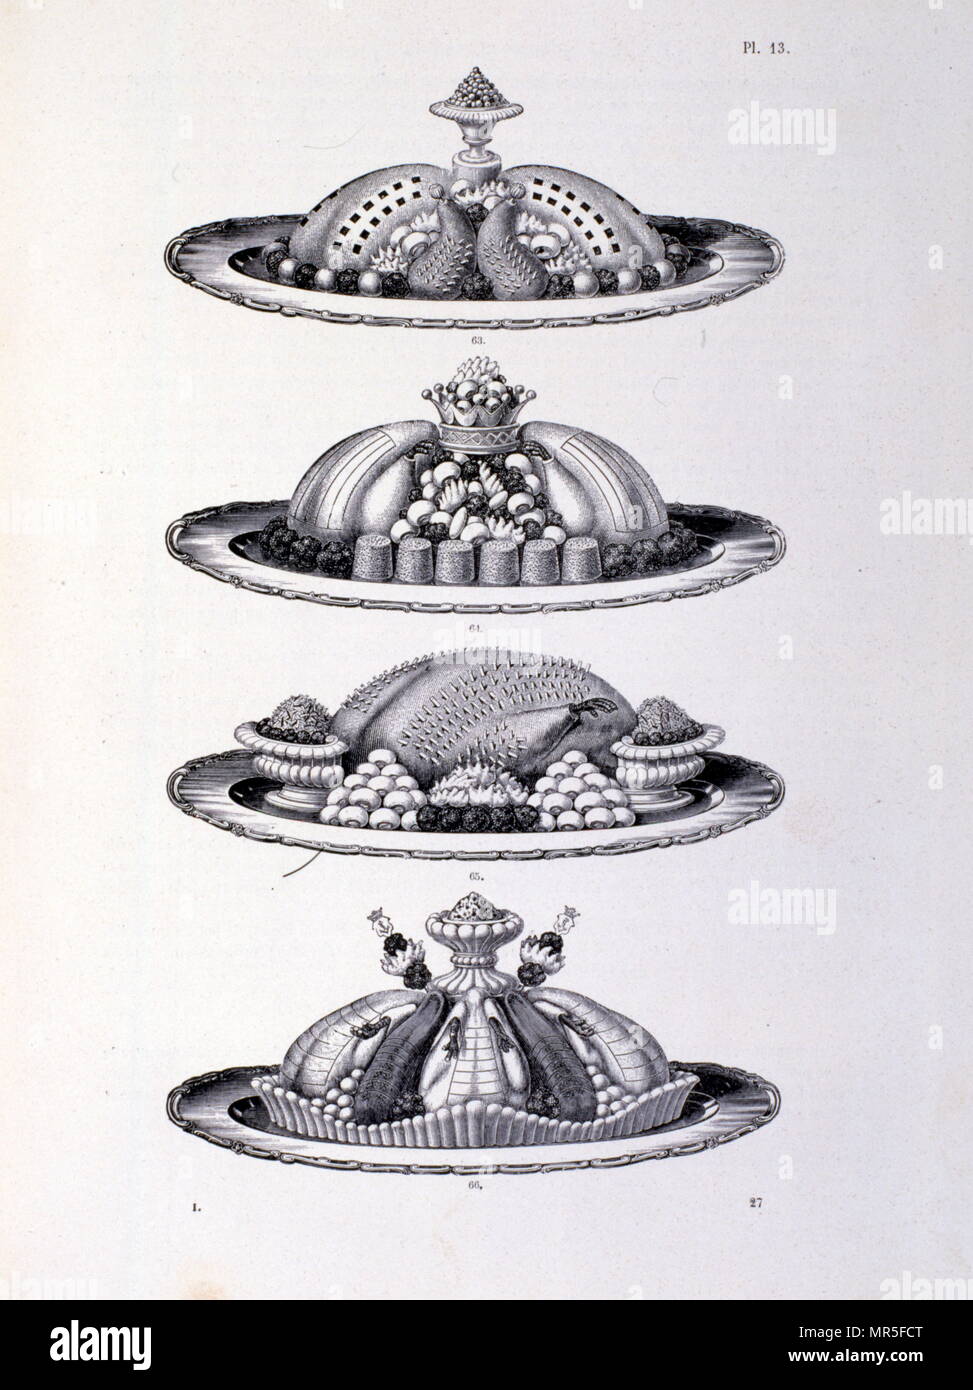 Illustration of a set of deserts from 'La cuisine classique' by Urbain Dubois and Emile Bernard Stock Photo